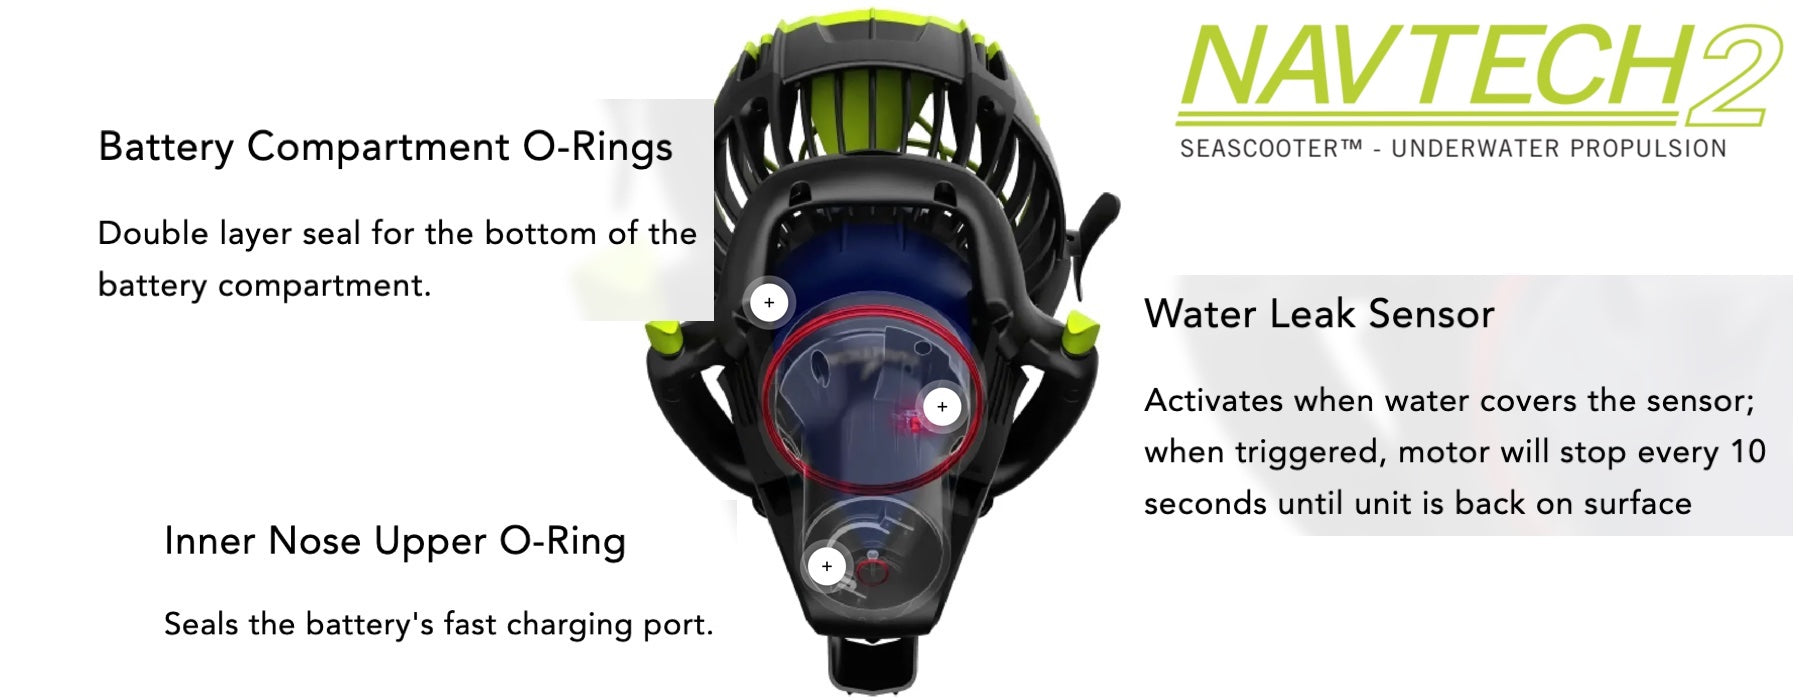 The Nautica Navtech 2 Sea Scooters Superior Flood Prevention System is featured. It shows a closeup of the inside and how the rubber rings seal it air tight.